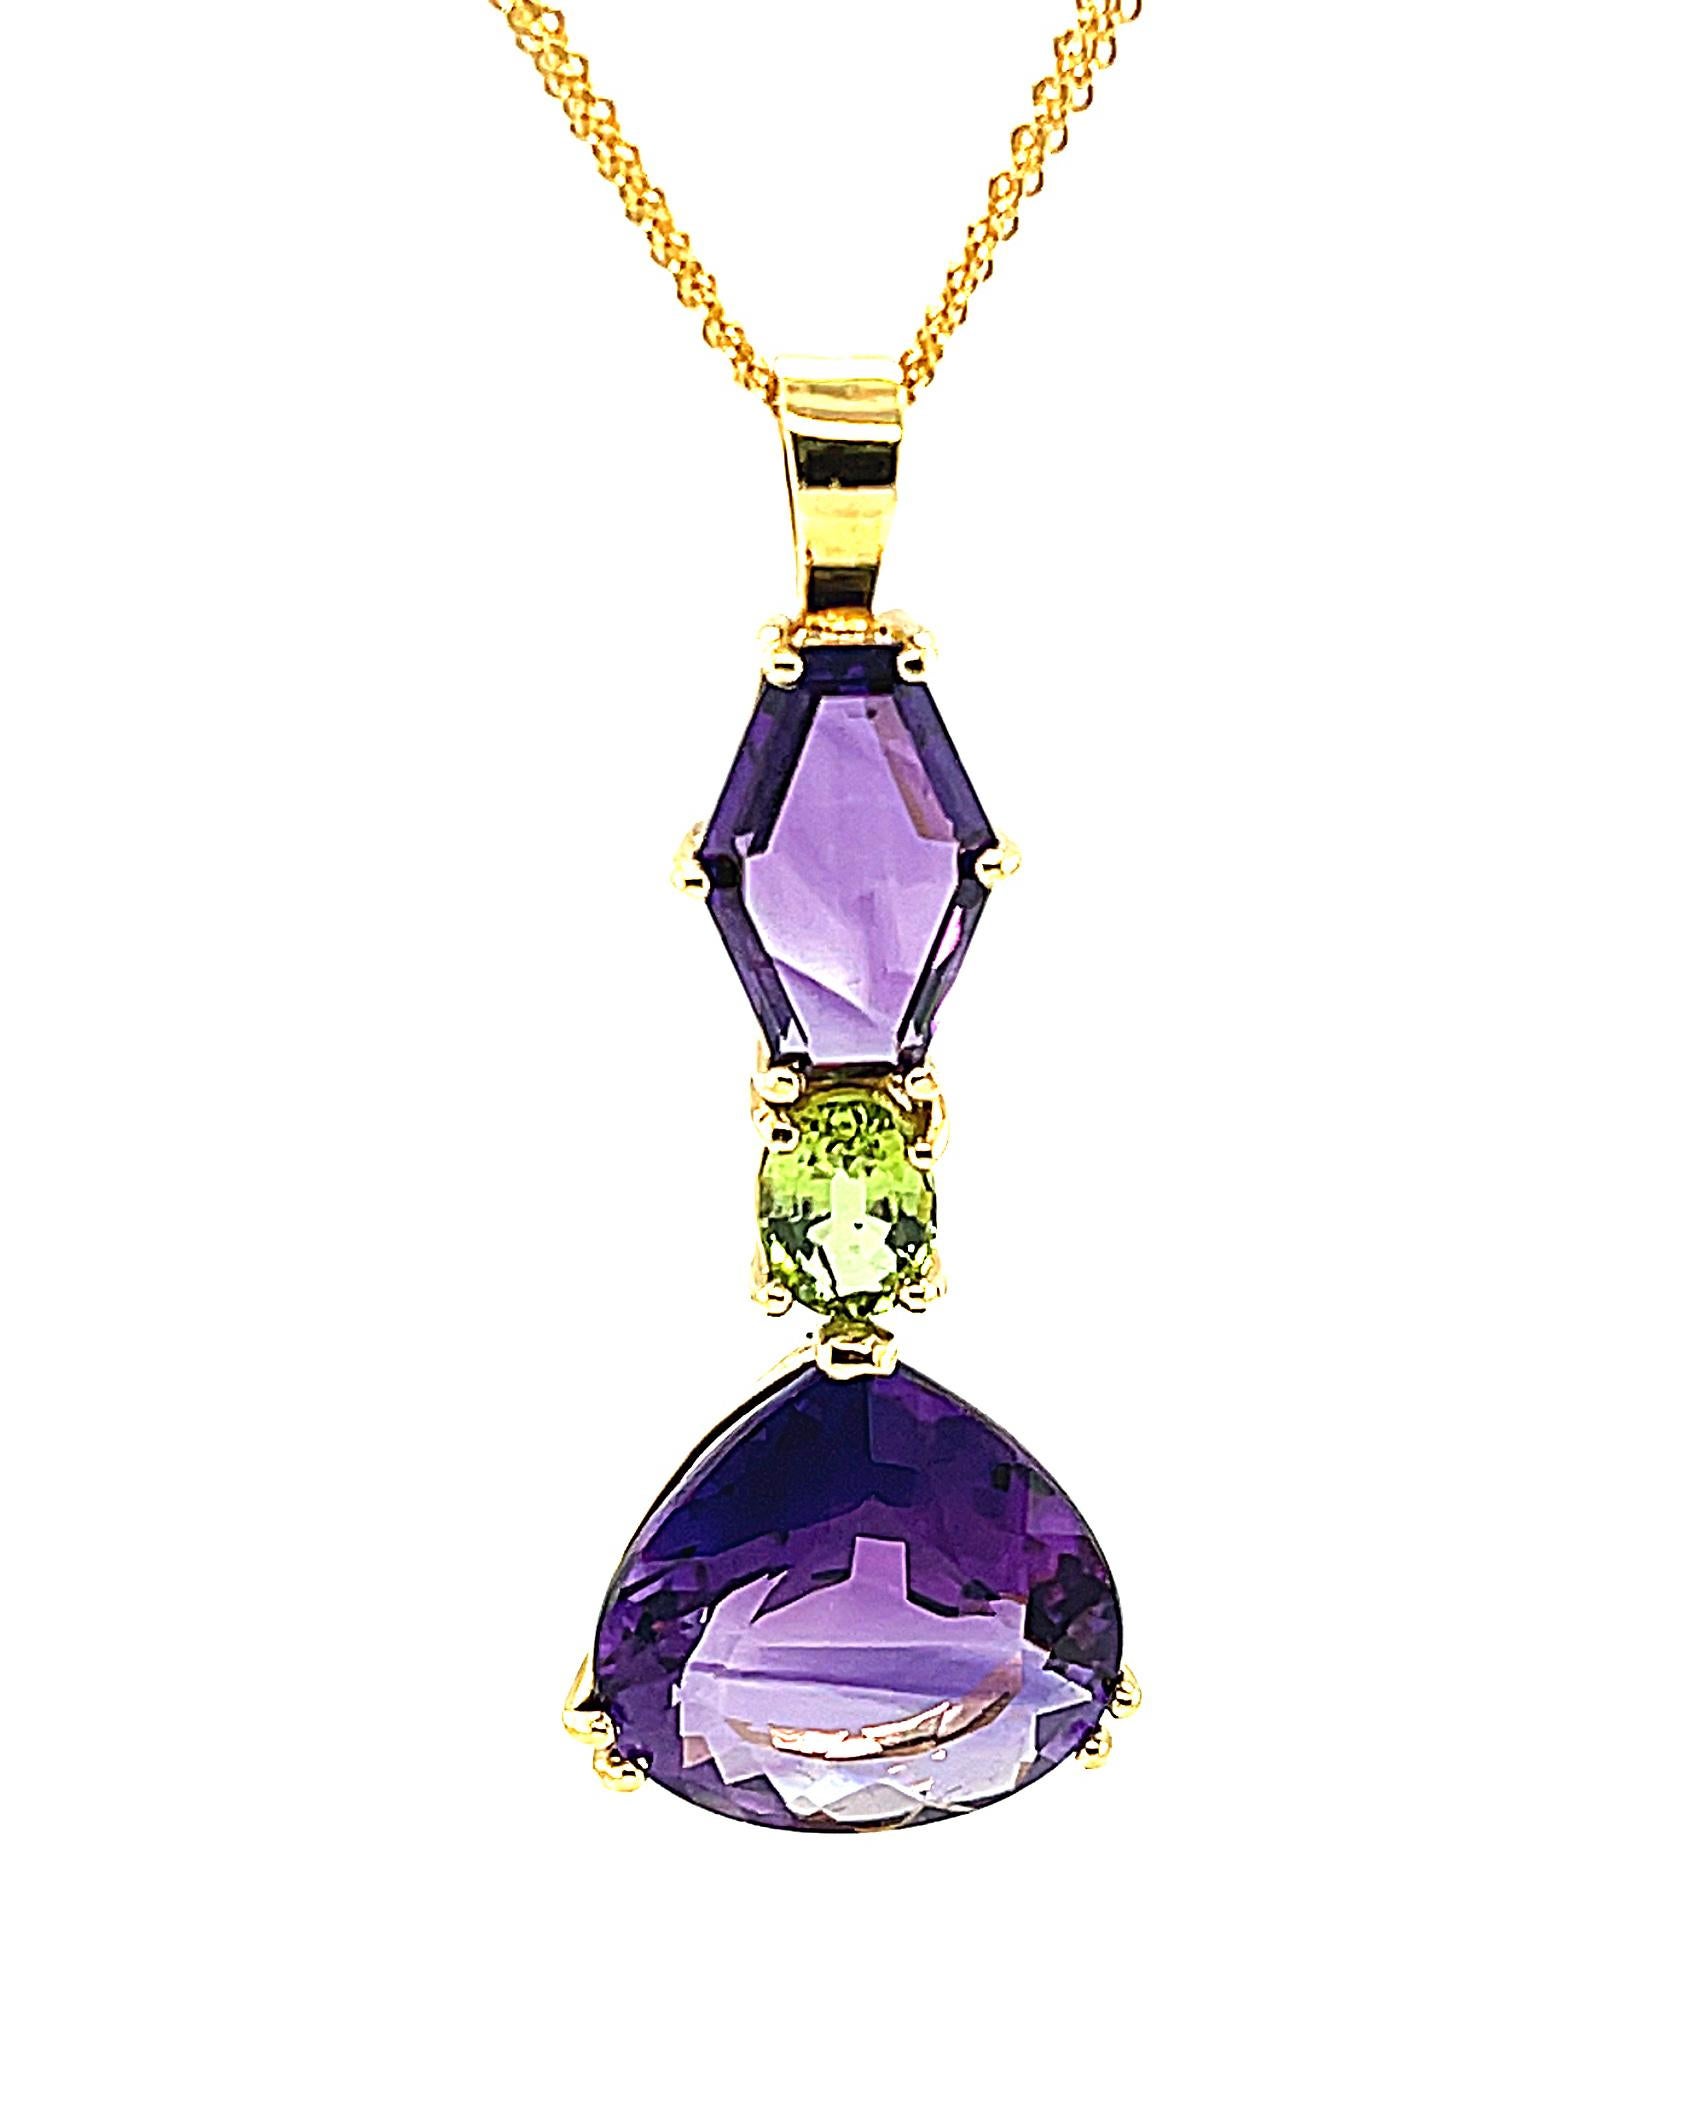  10 Carat Amethyst Drop Necklace with Peridot in 18k Yellow Gold In New Condition For Sale In Los Angeles, CA